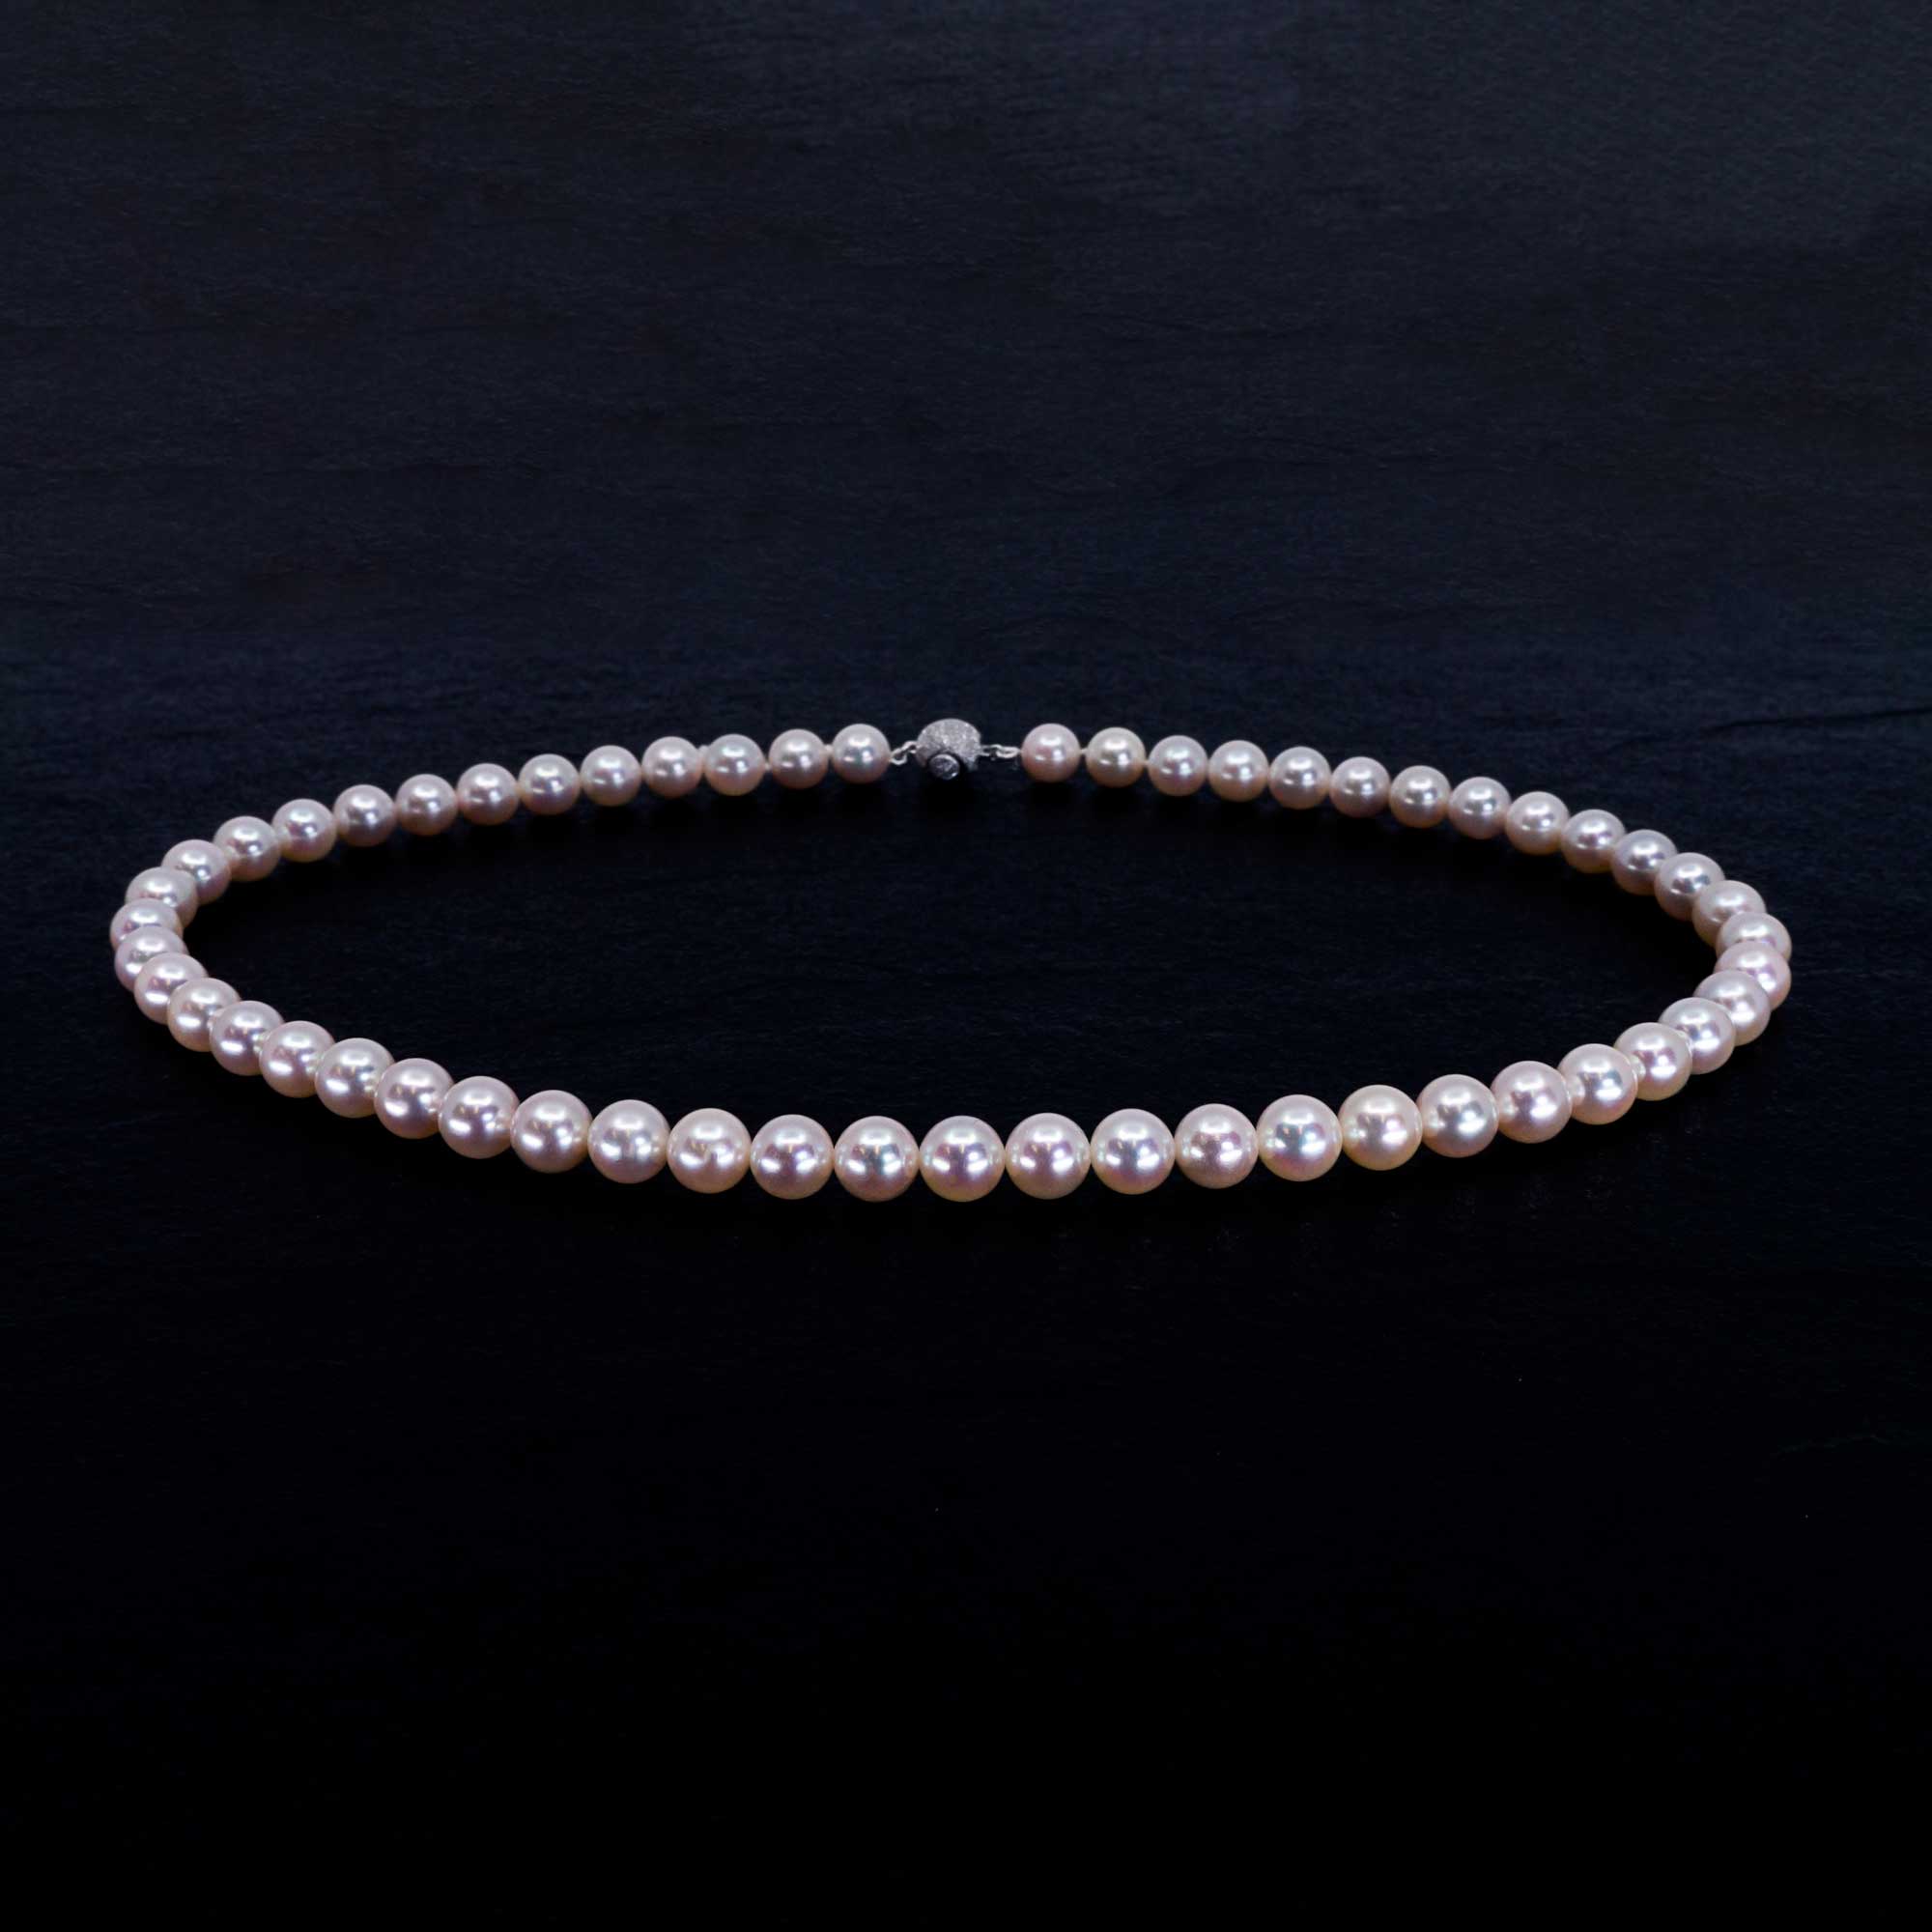 Detail Pearls Images Nomer 52